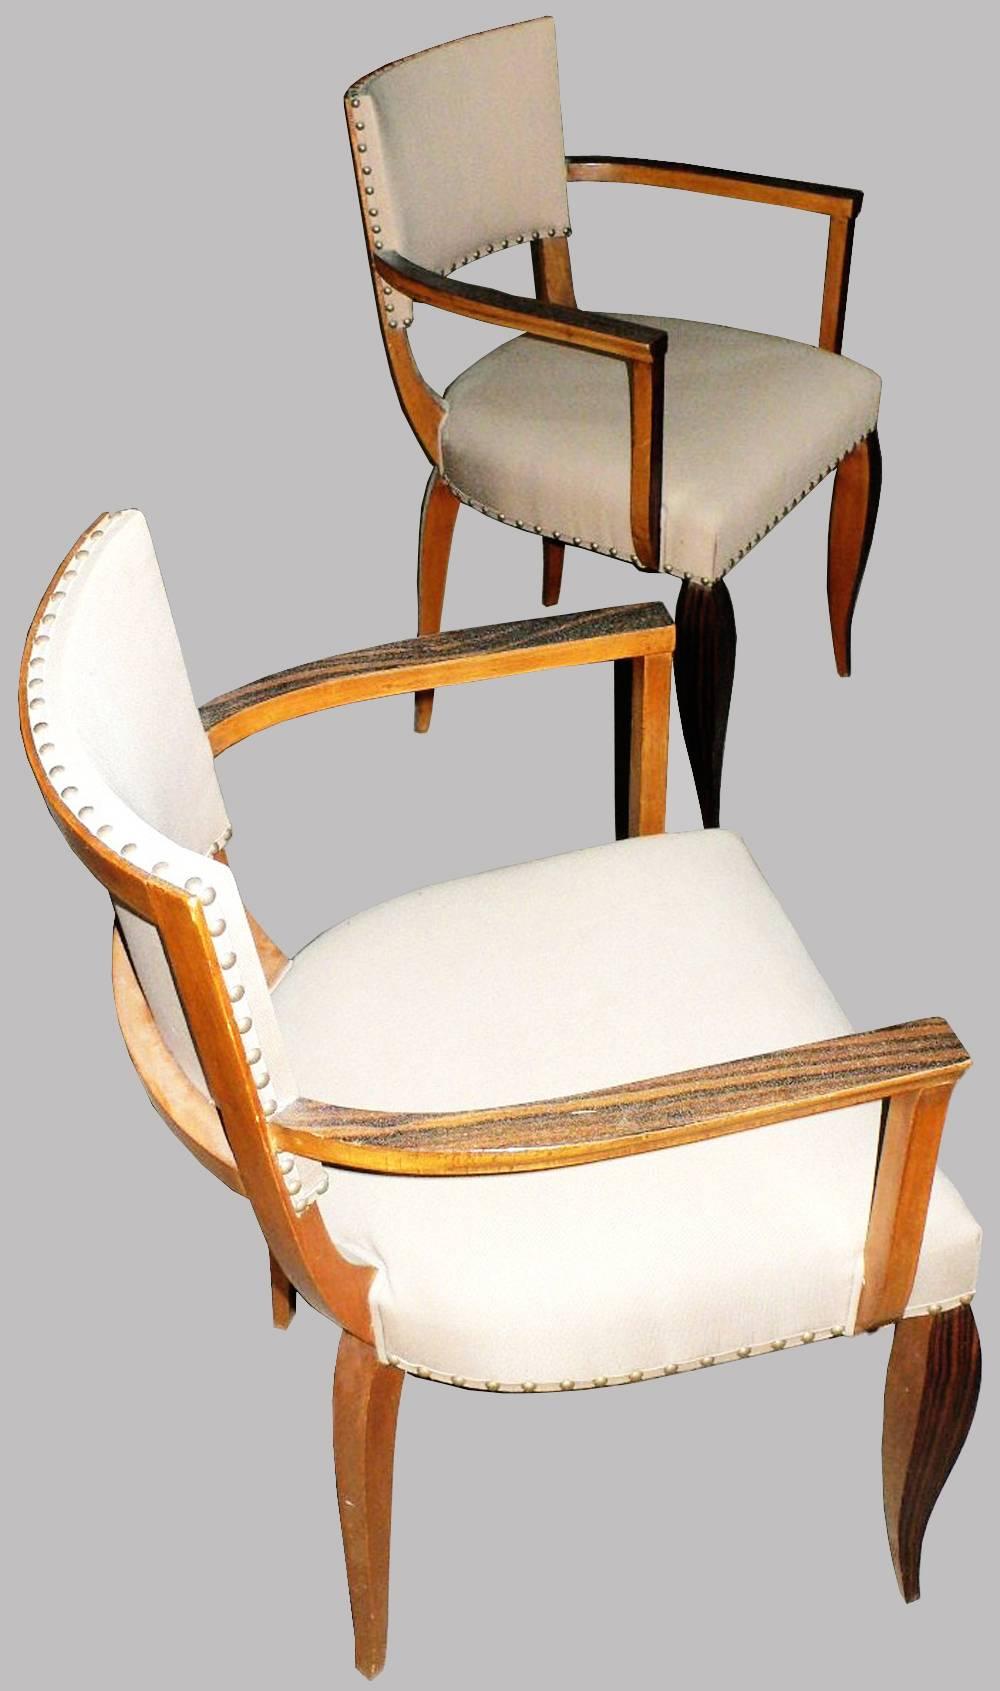 Pair of original French Bridge style Art Deco Office, living, dining room or bedroom elegant armchairs, attributed to Henri Bonjour.
Veneered ebony of Macassar wood with cream top and seating fabrics and beautiful legs, all in a very good